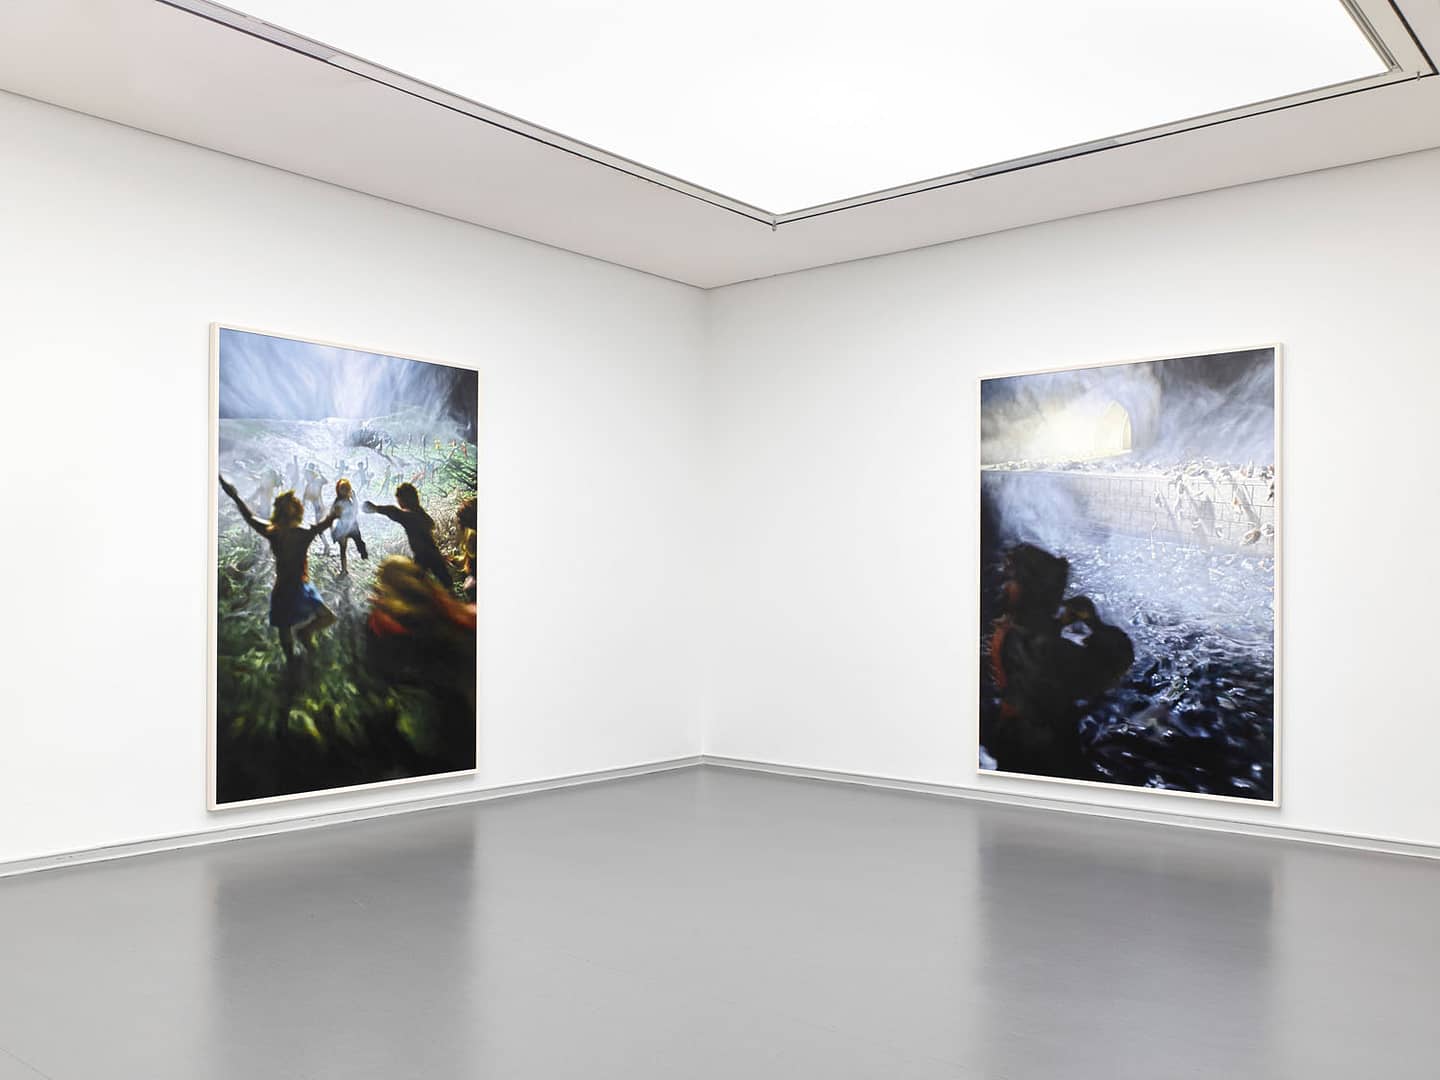 Exhibition view of Philipp Fröhlich's solo show Märchen at Von der Heydt Kunsthalle Barmen, produced by Kunst- und Museumsverein Wuppertal. The image shows two paintings based on "der Rattenfänger von Hameln" (the pied piper of Hamelin, a legend collected by the brothers Grimm